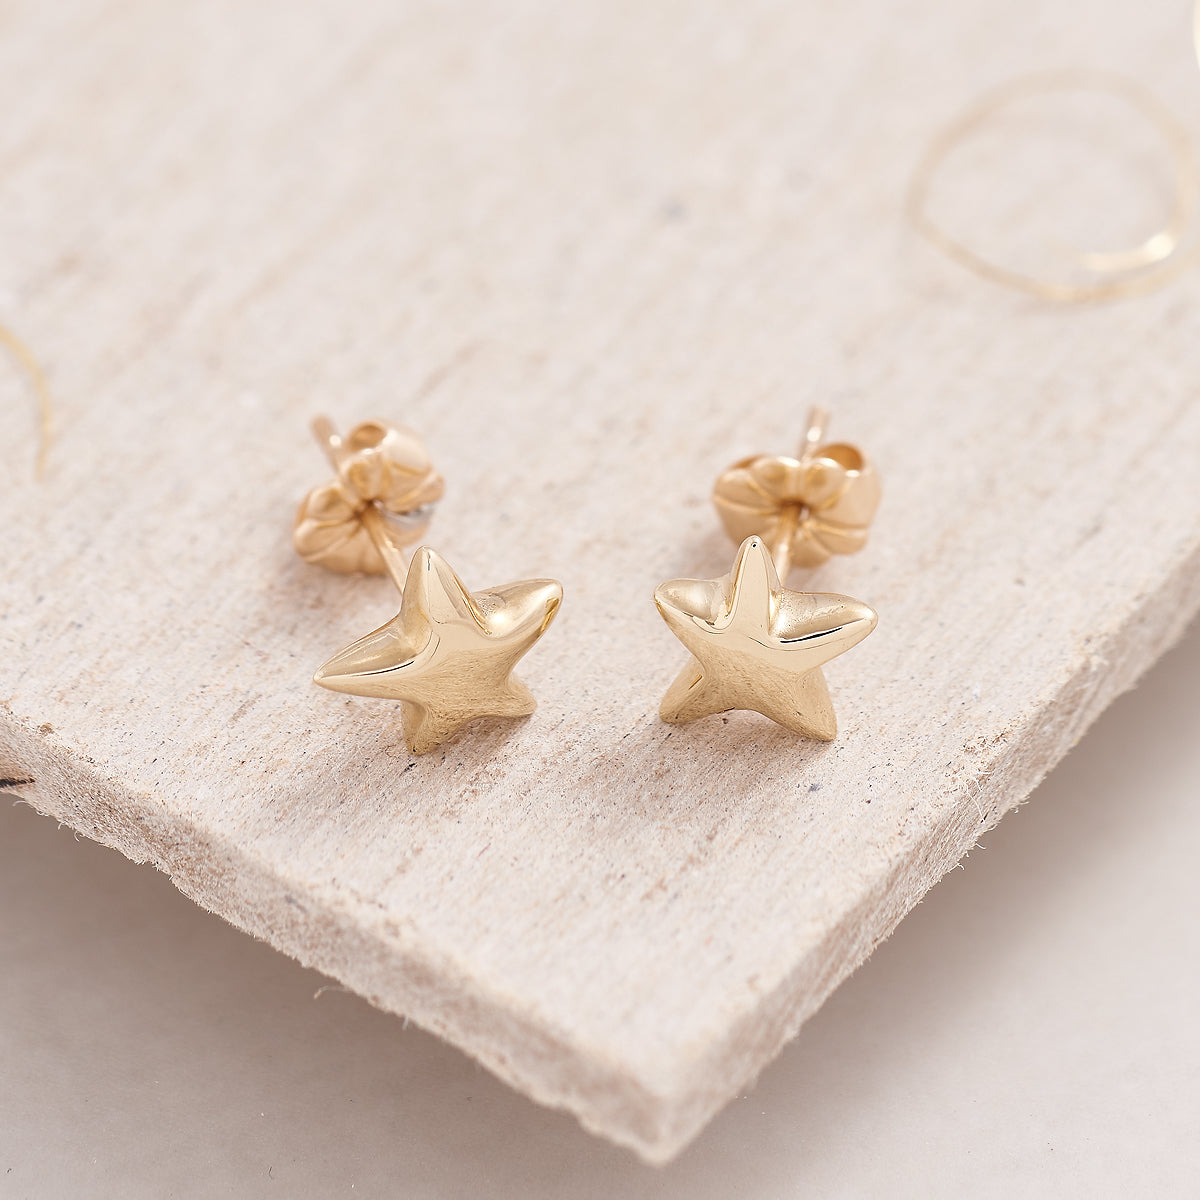 Handcrafted Solid 9k Gold Star Studs